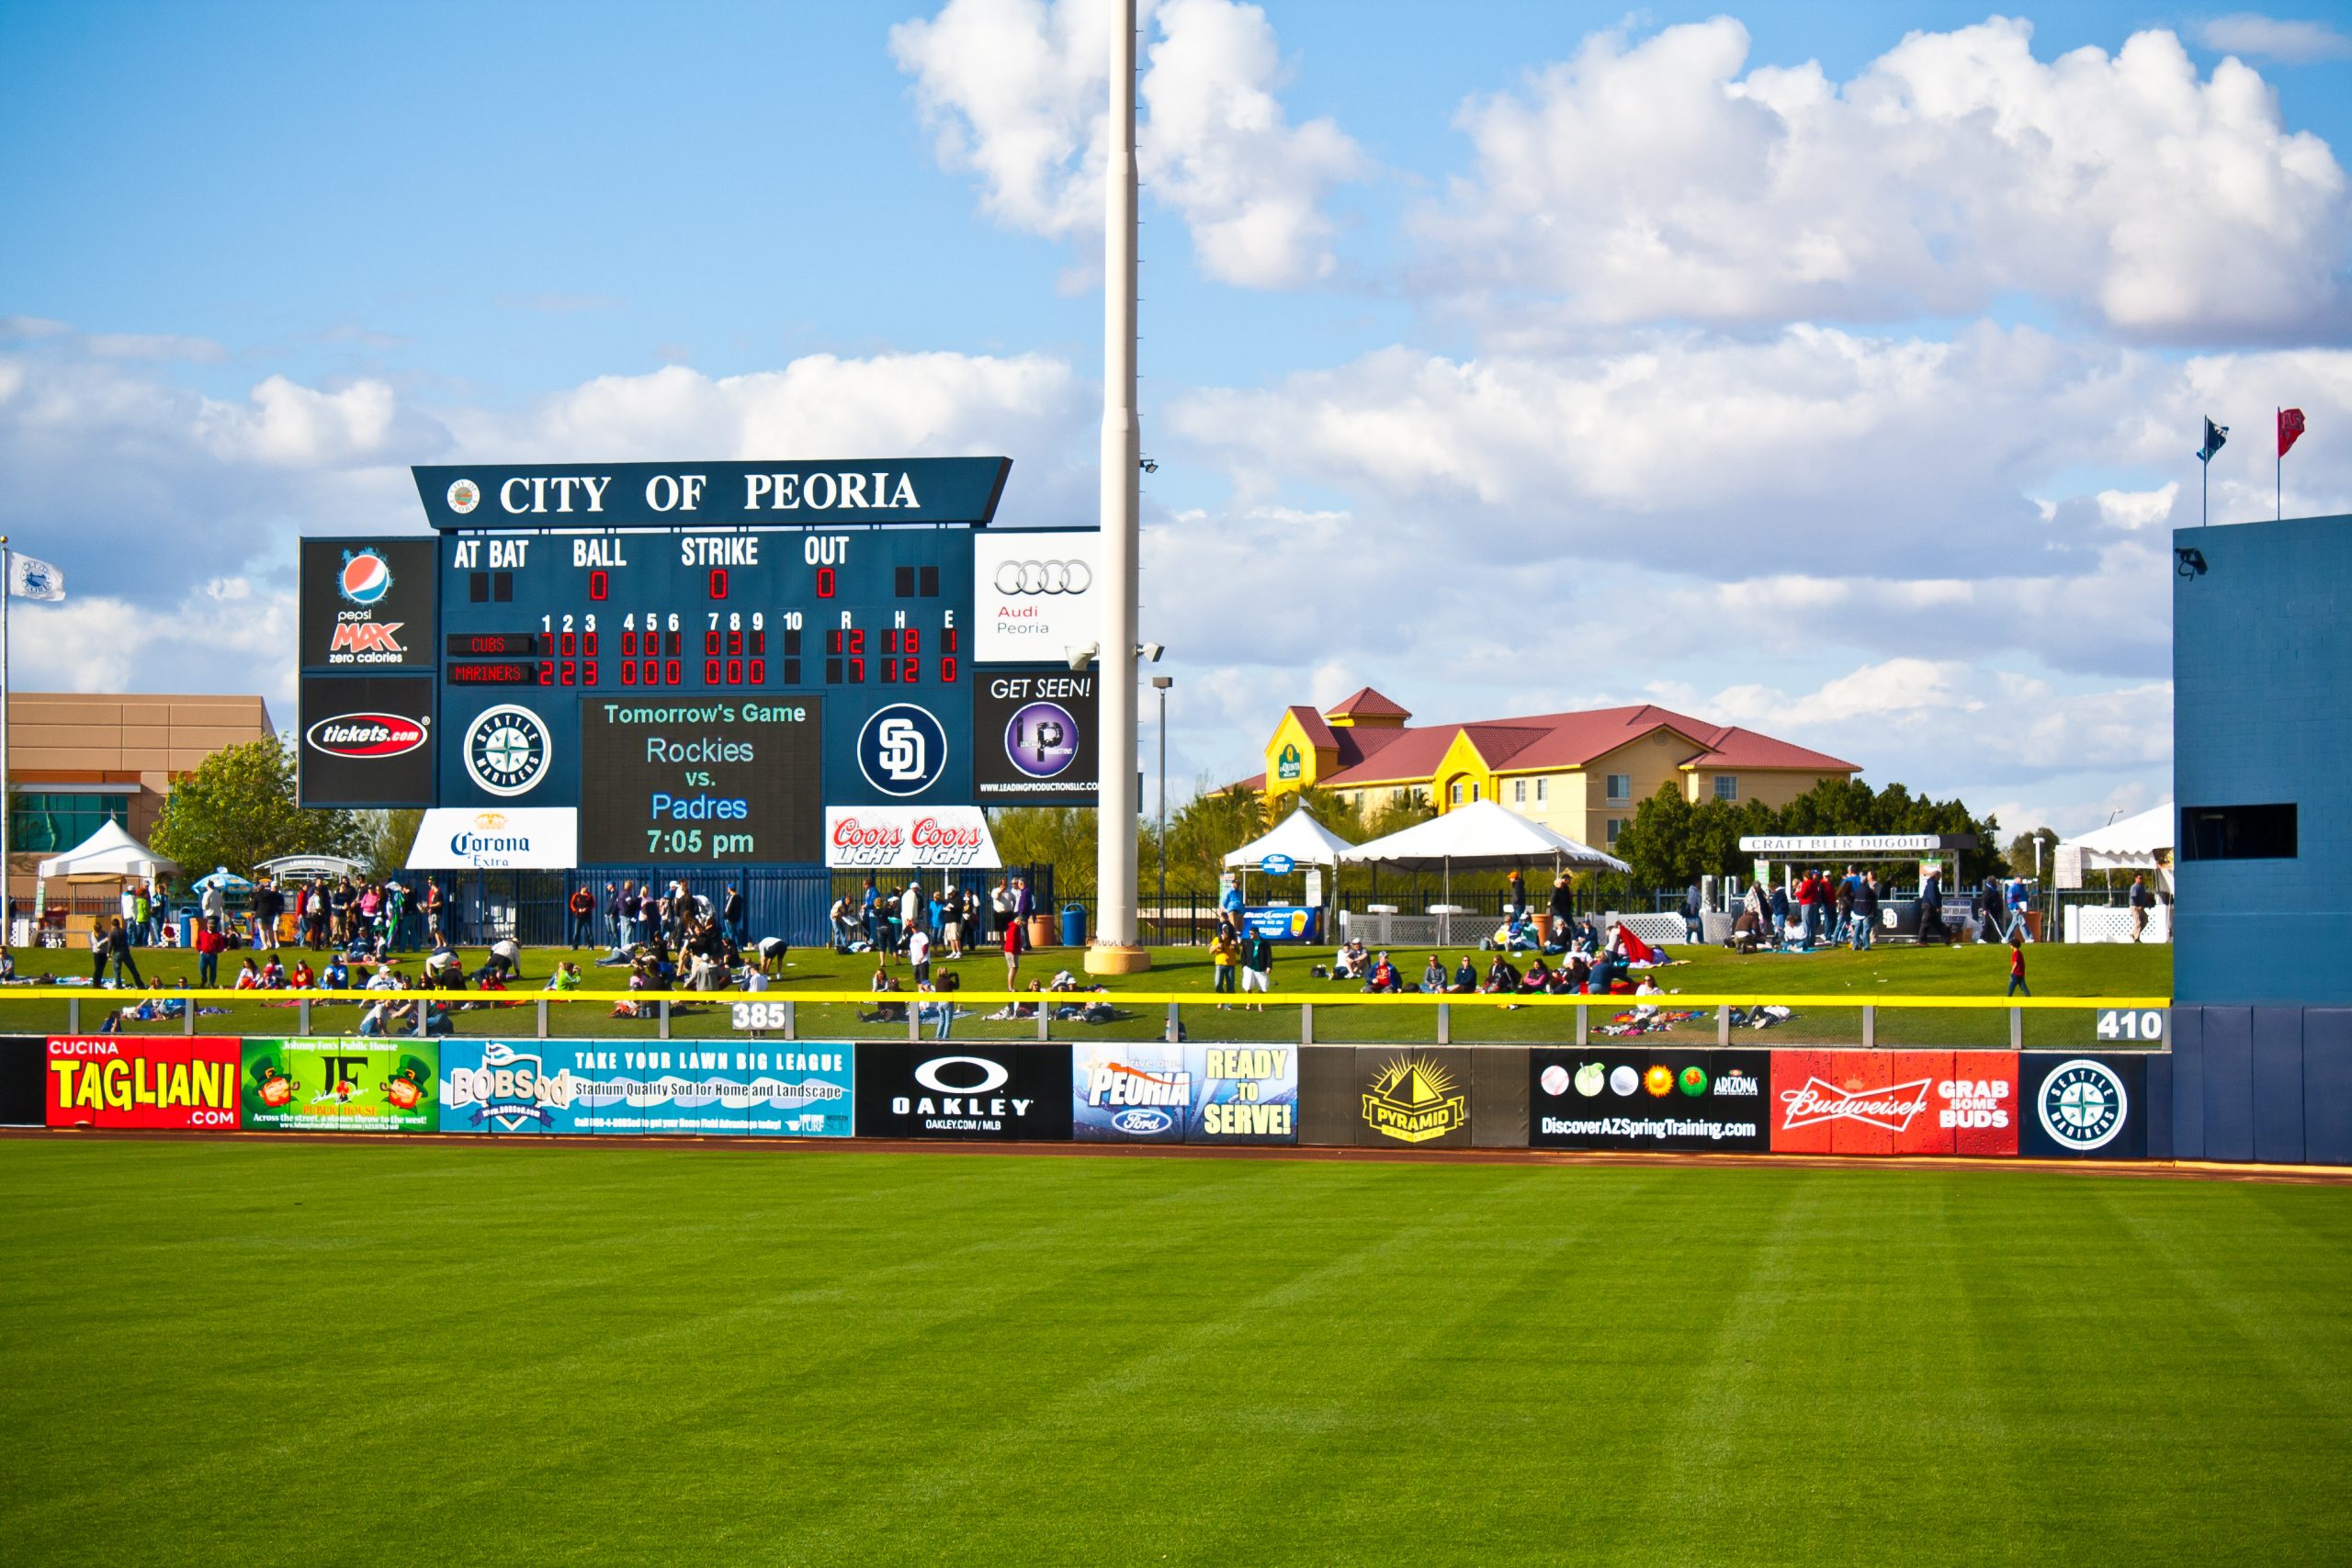 The Guide to Planning a Trip to MLB’s Spring Training